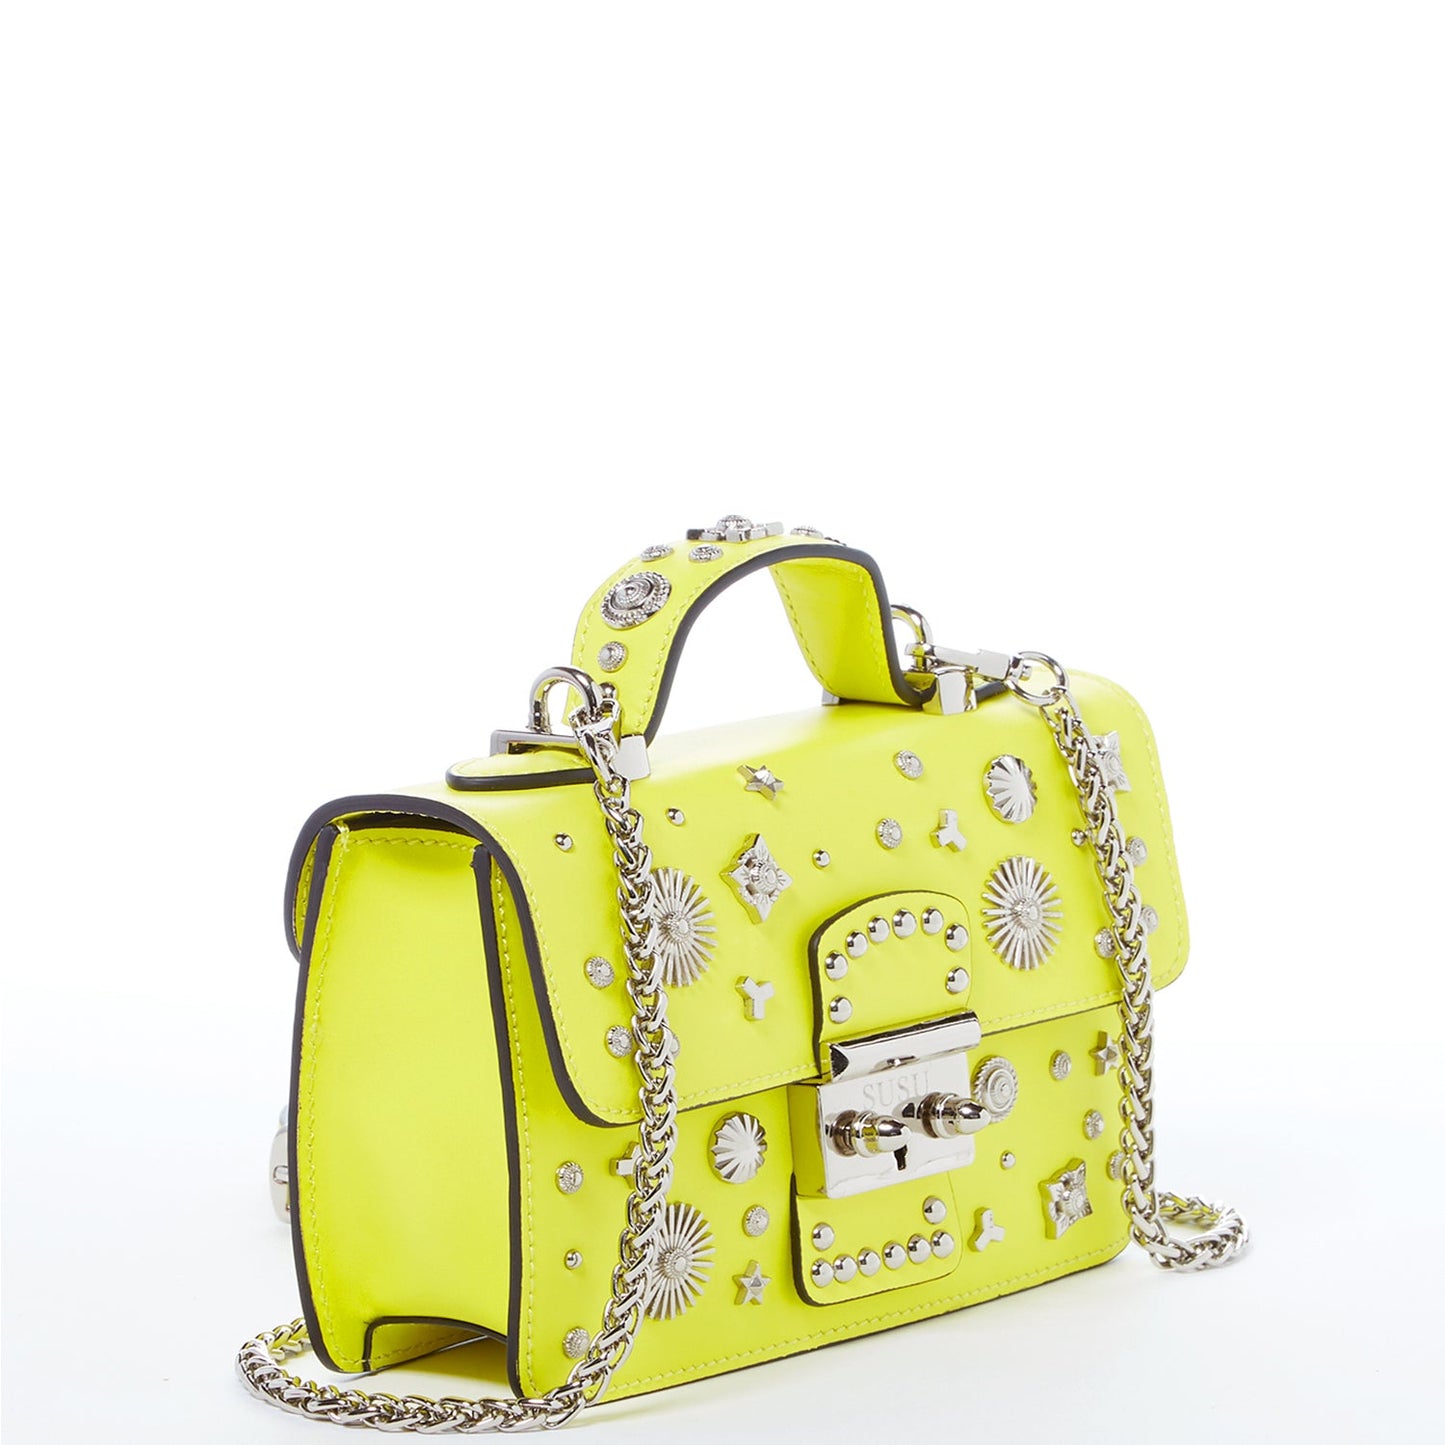 The Hollywood Studded Leather Crossbody Bag in Neon Yellow